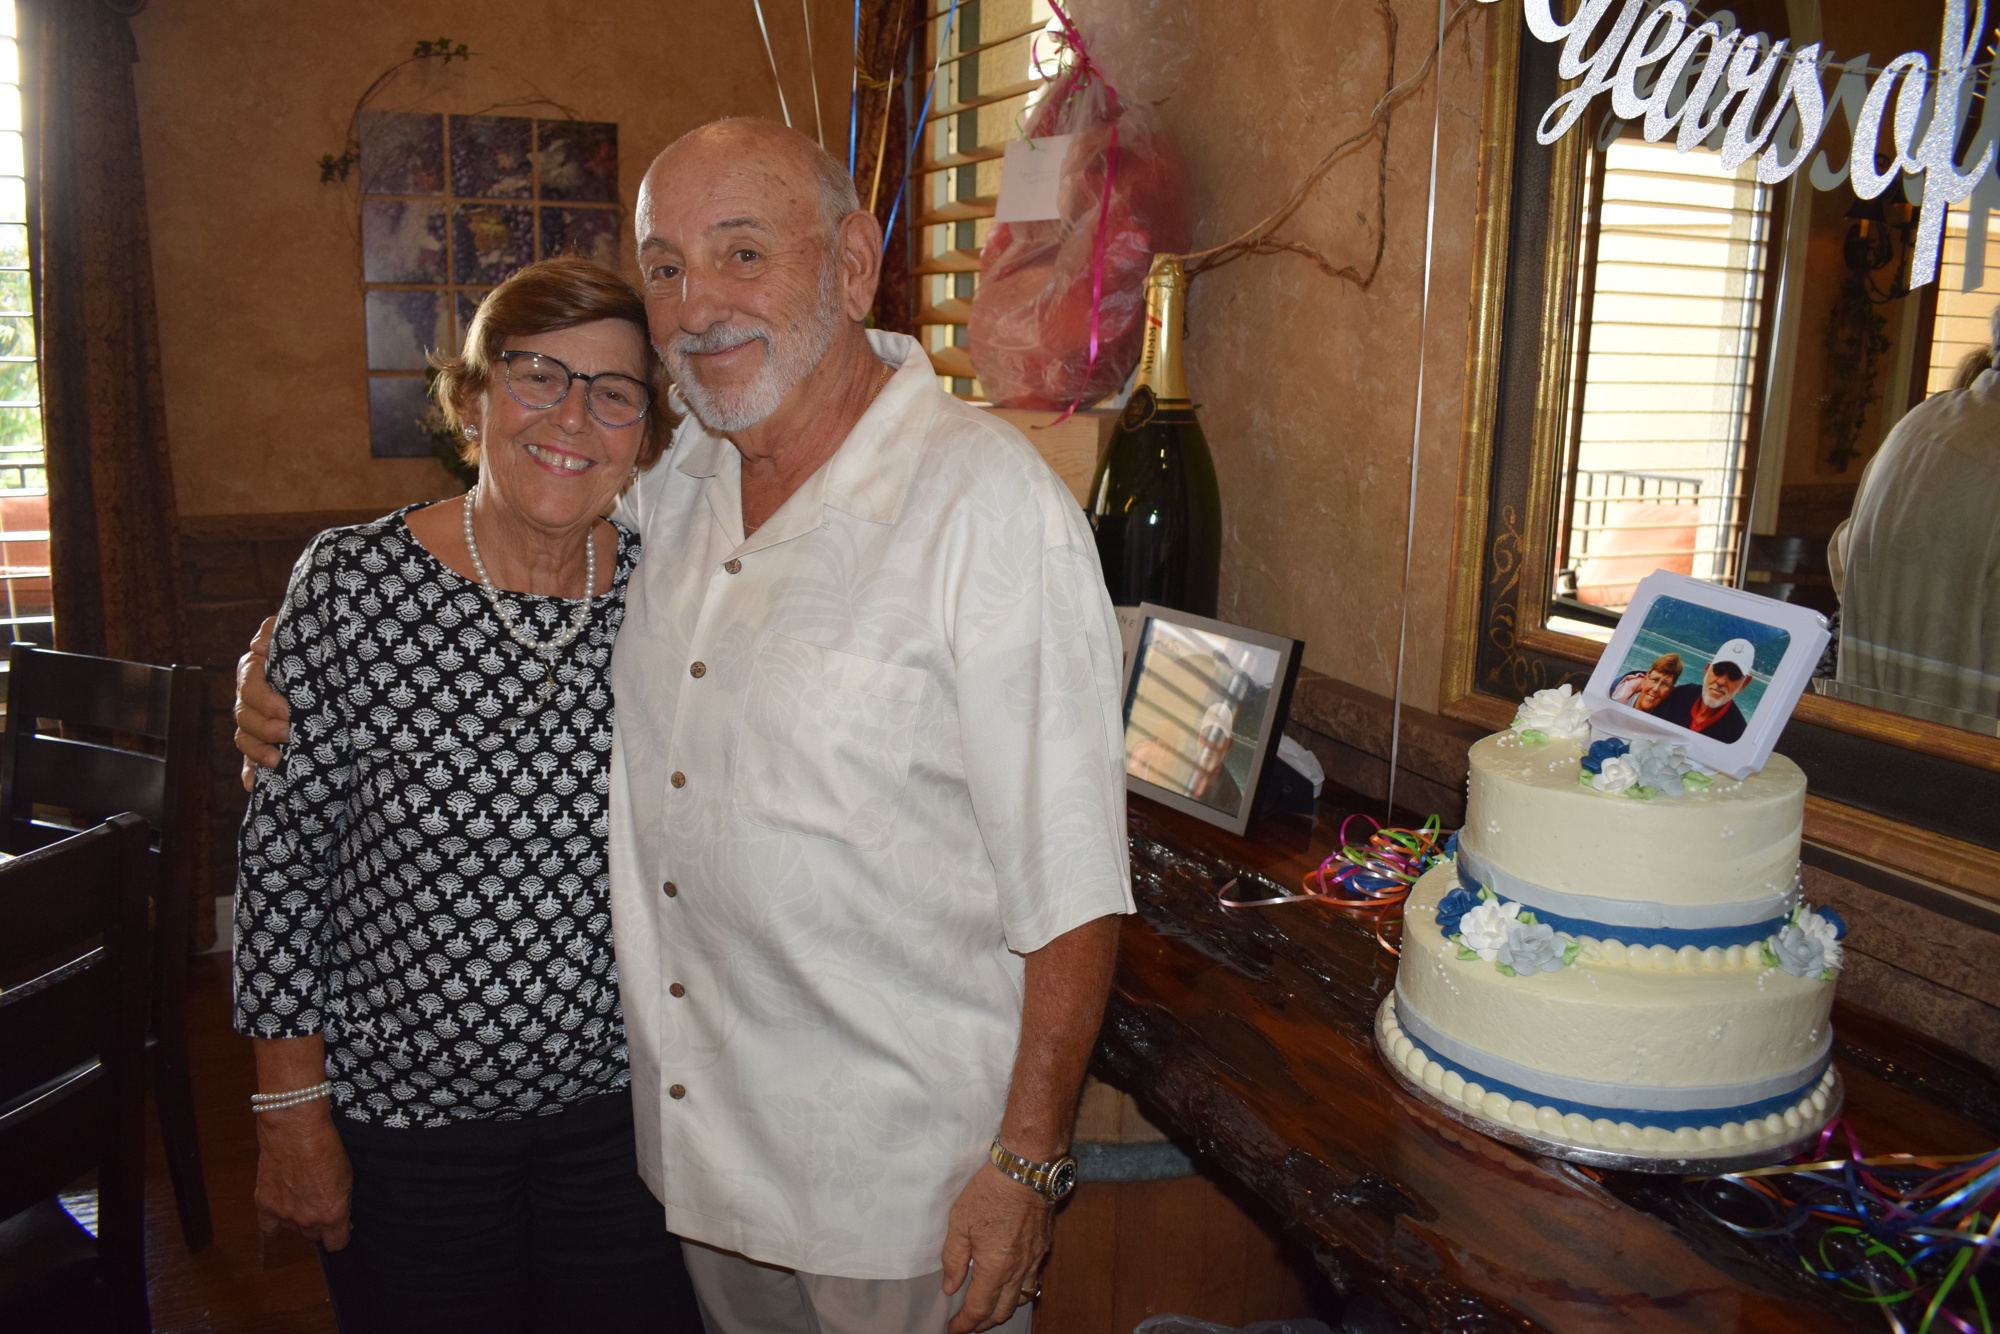 Lakewood Ranch's Tina and Bill Gardner celebrated their 60th wedding anniversary July 1 at the Lakewood Ranch Country Club.